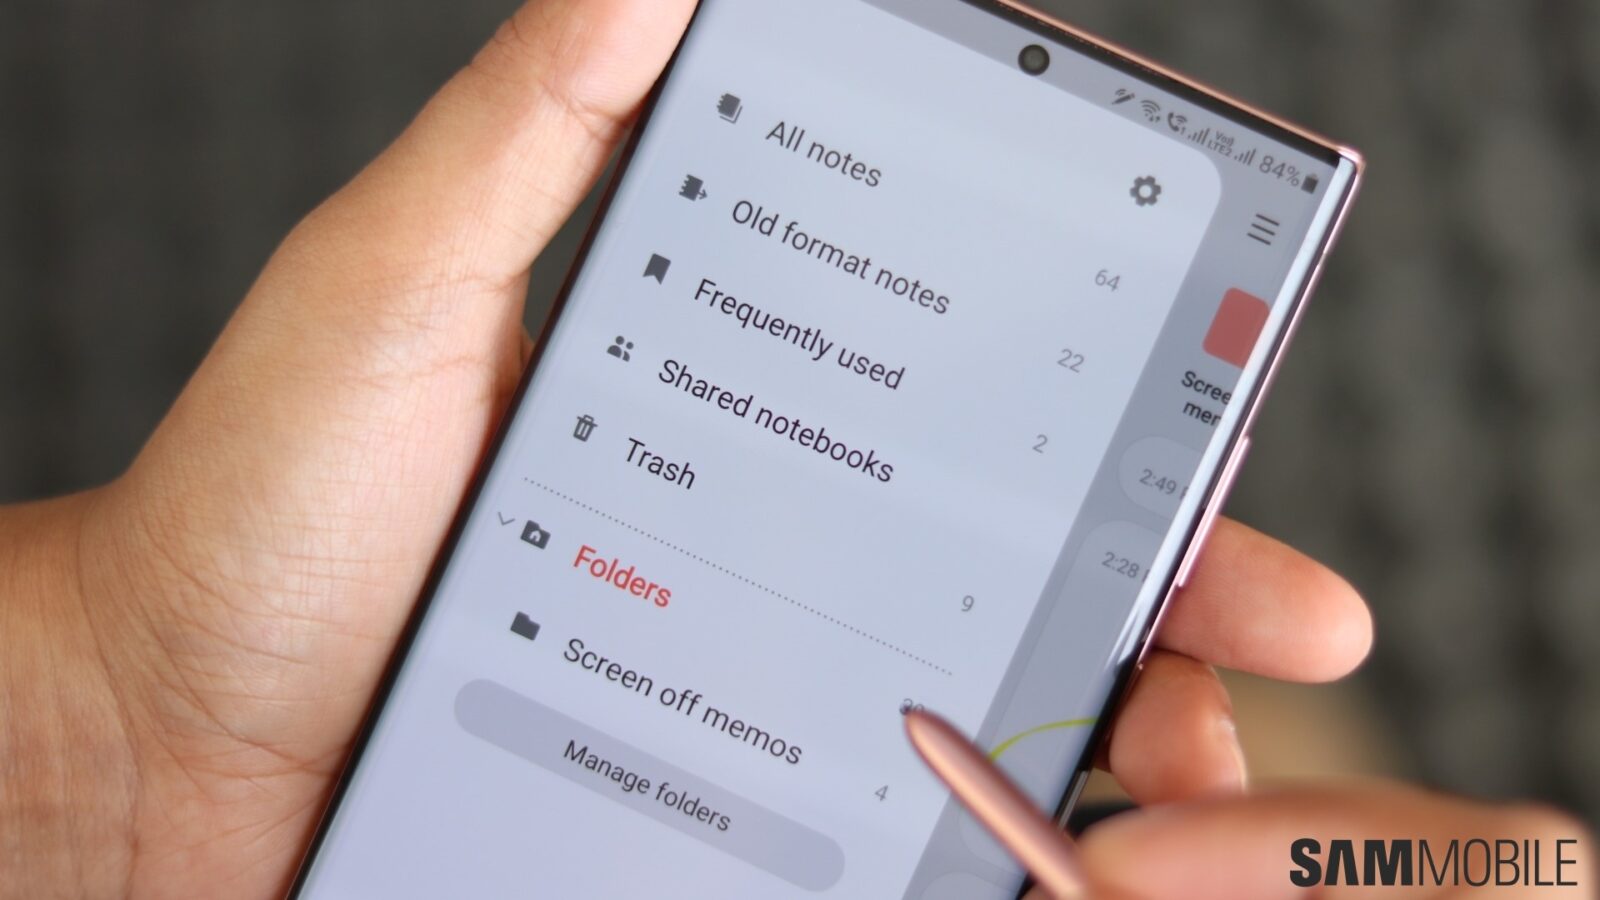 Samsung Notes update brings a new quick setting toggle SamMobile